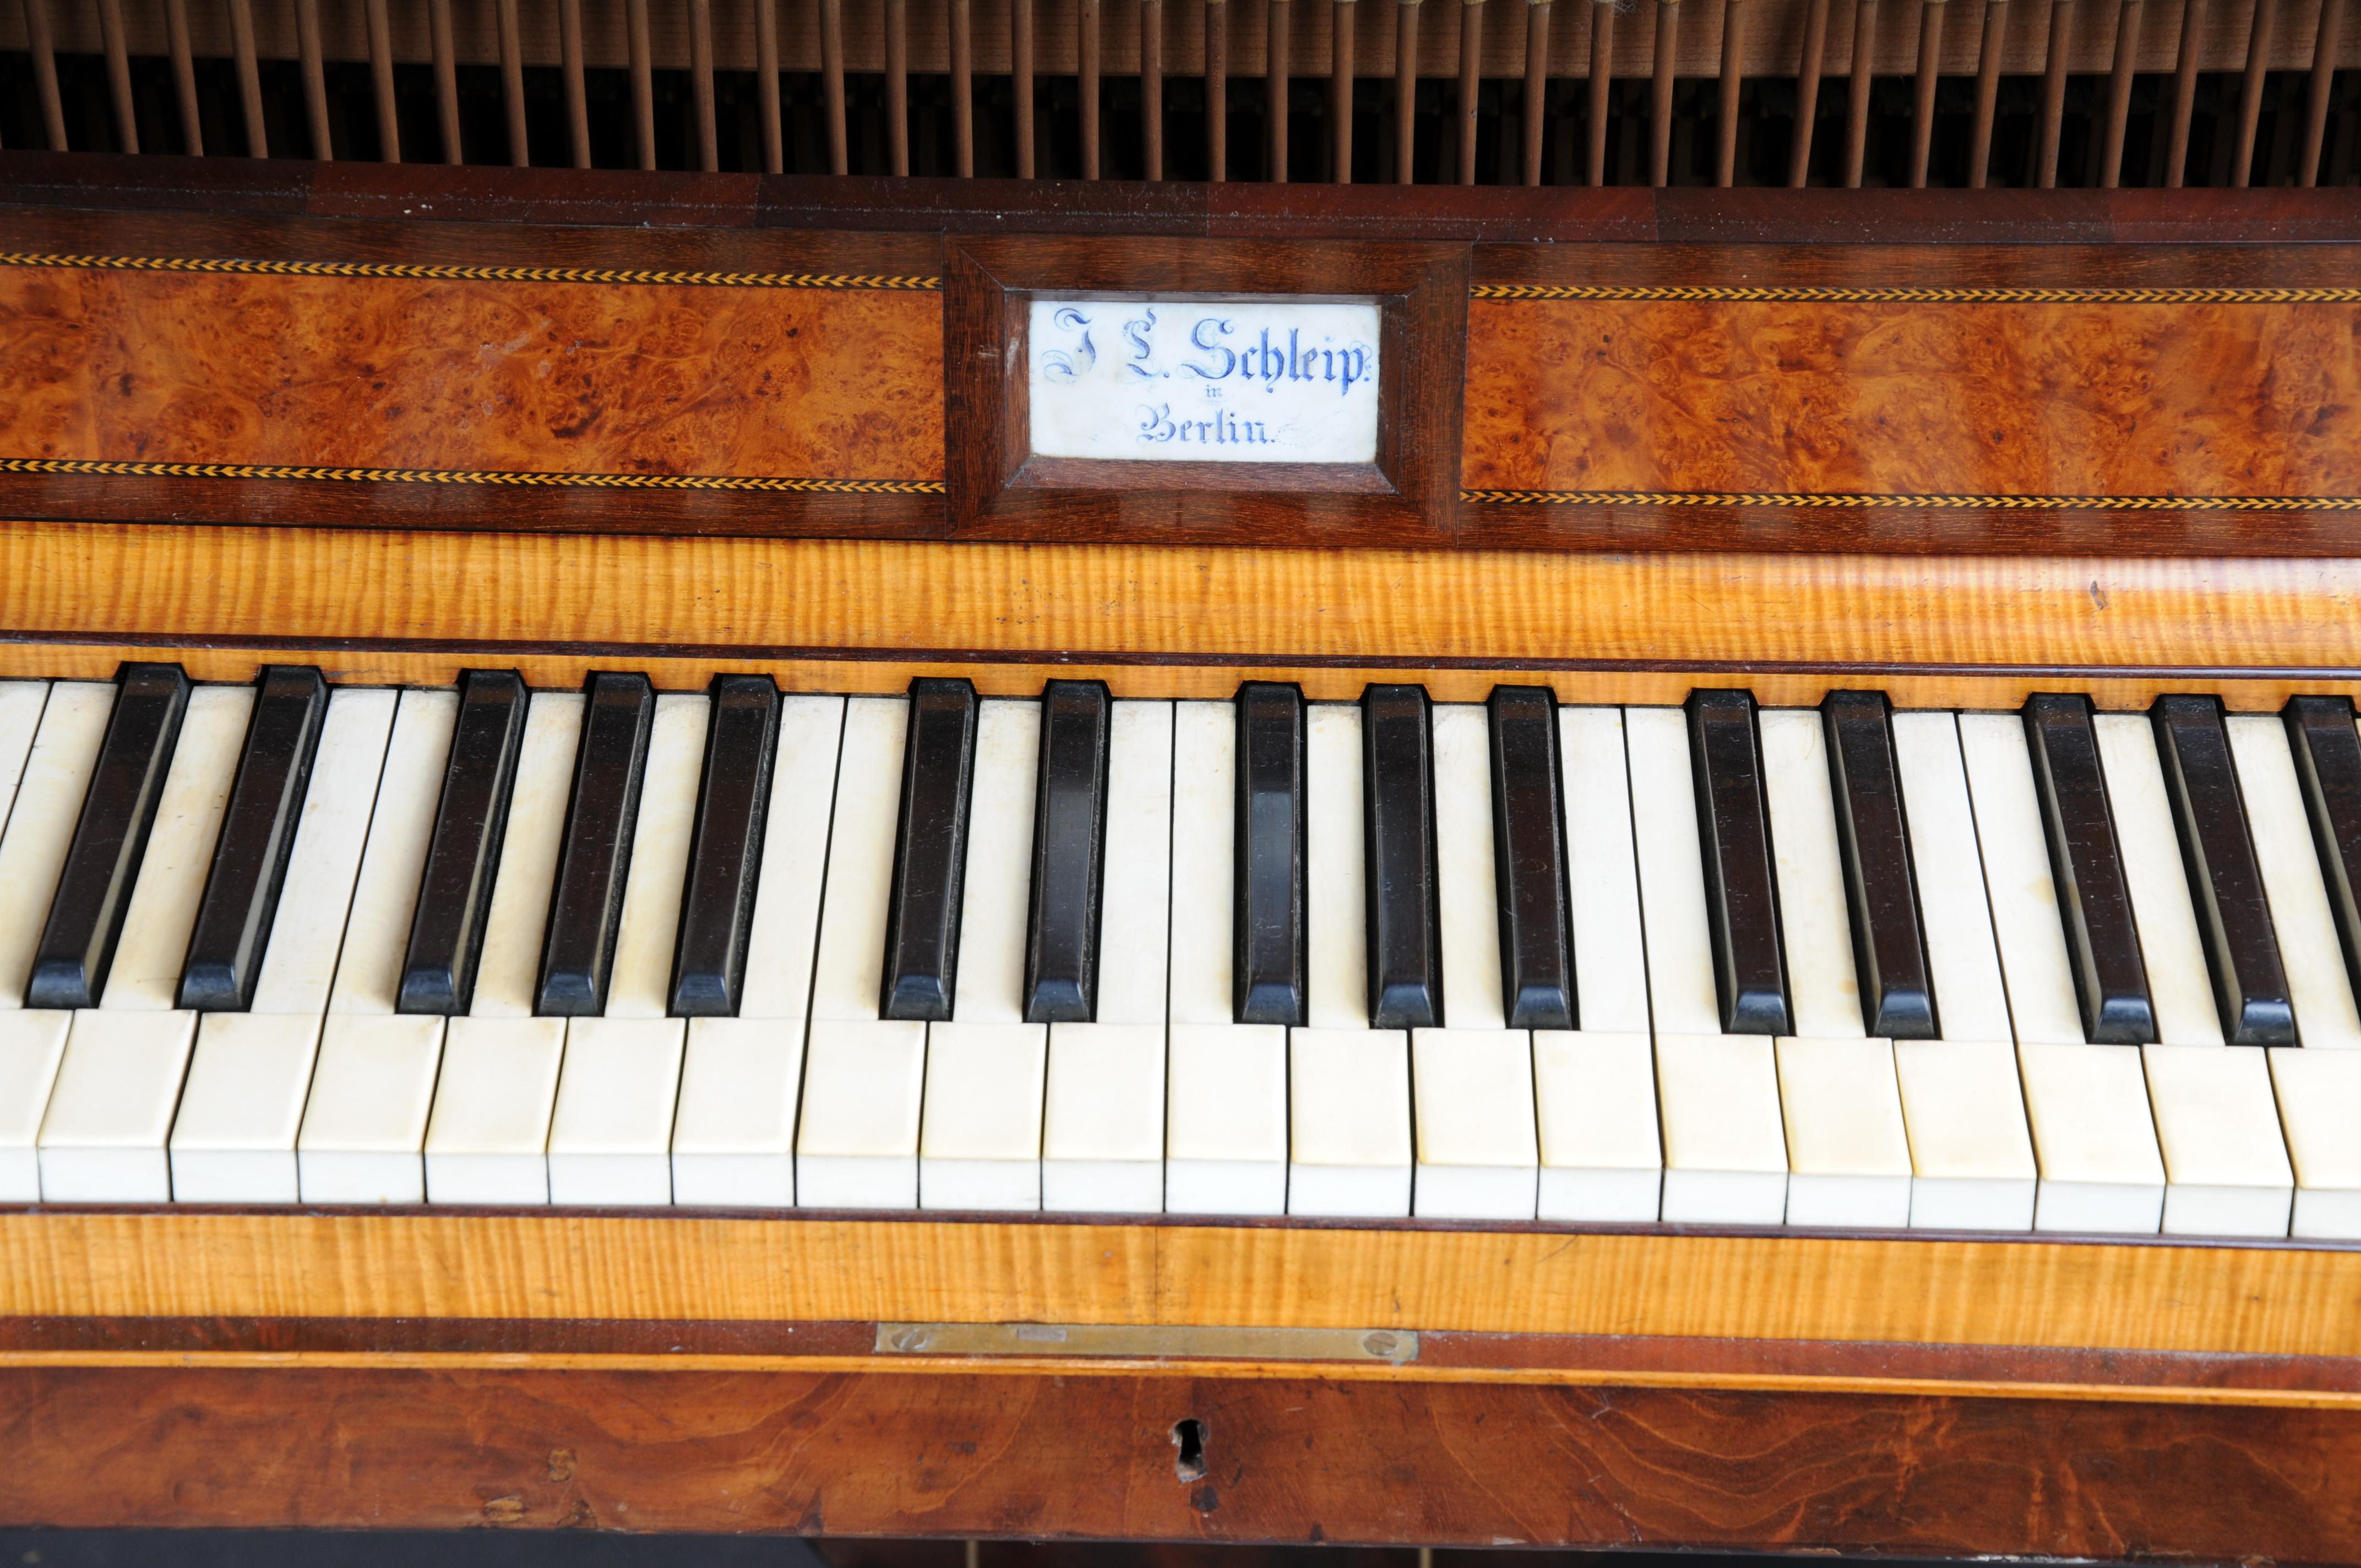 German Museum Lyre Grand Piano by J.C Schleip Berlin from 1825, Empire For Sale